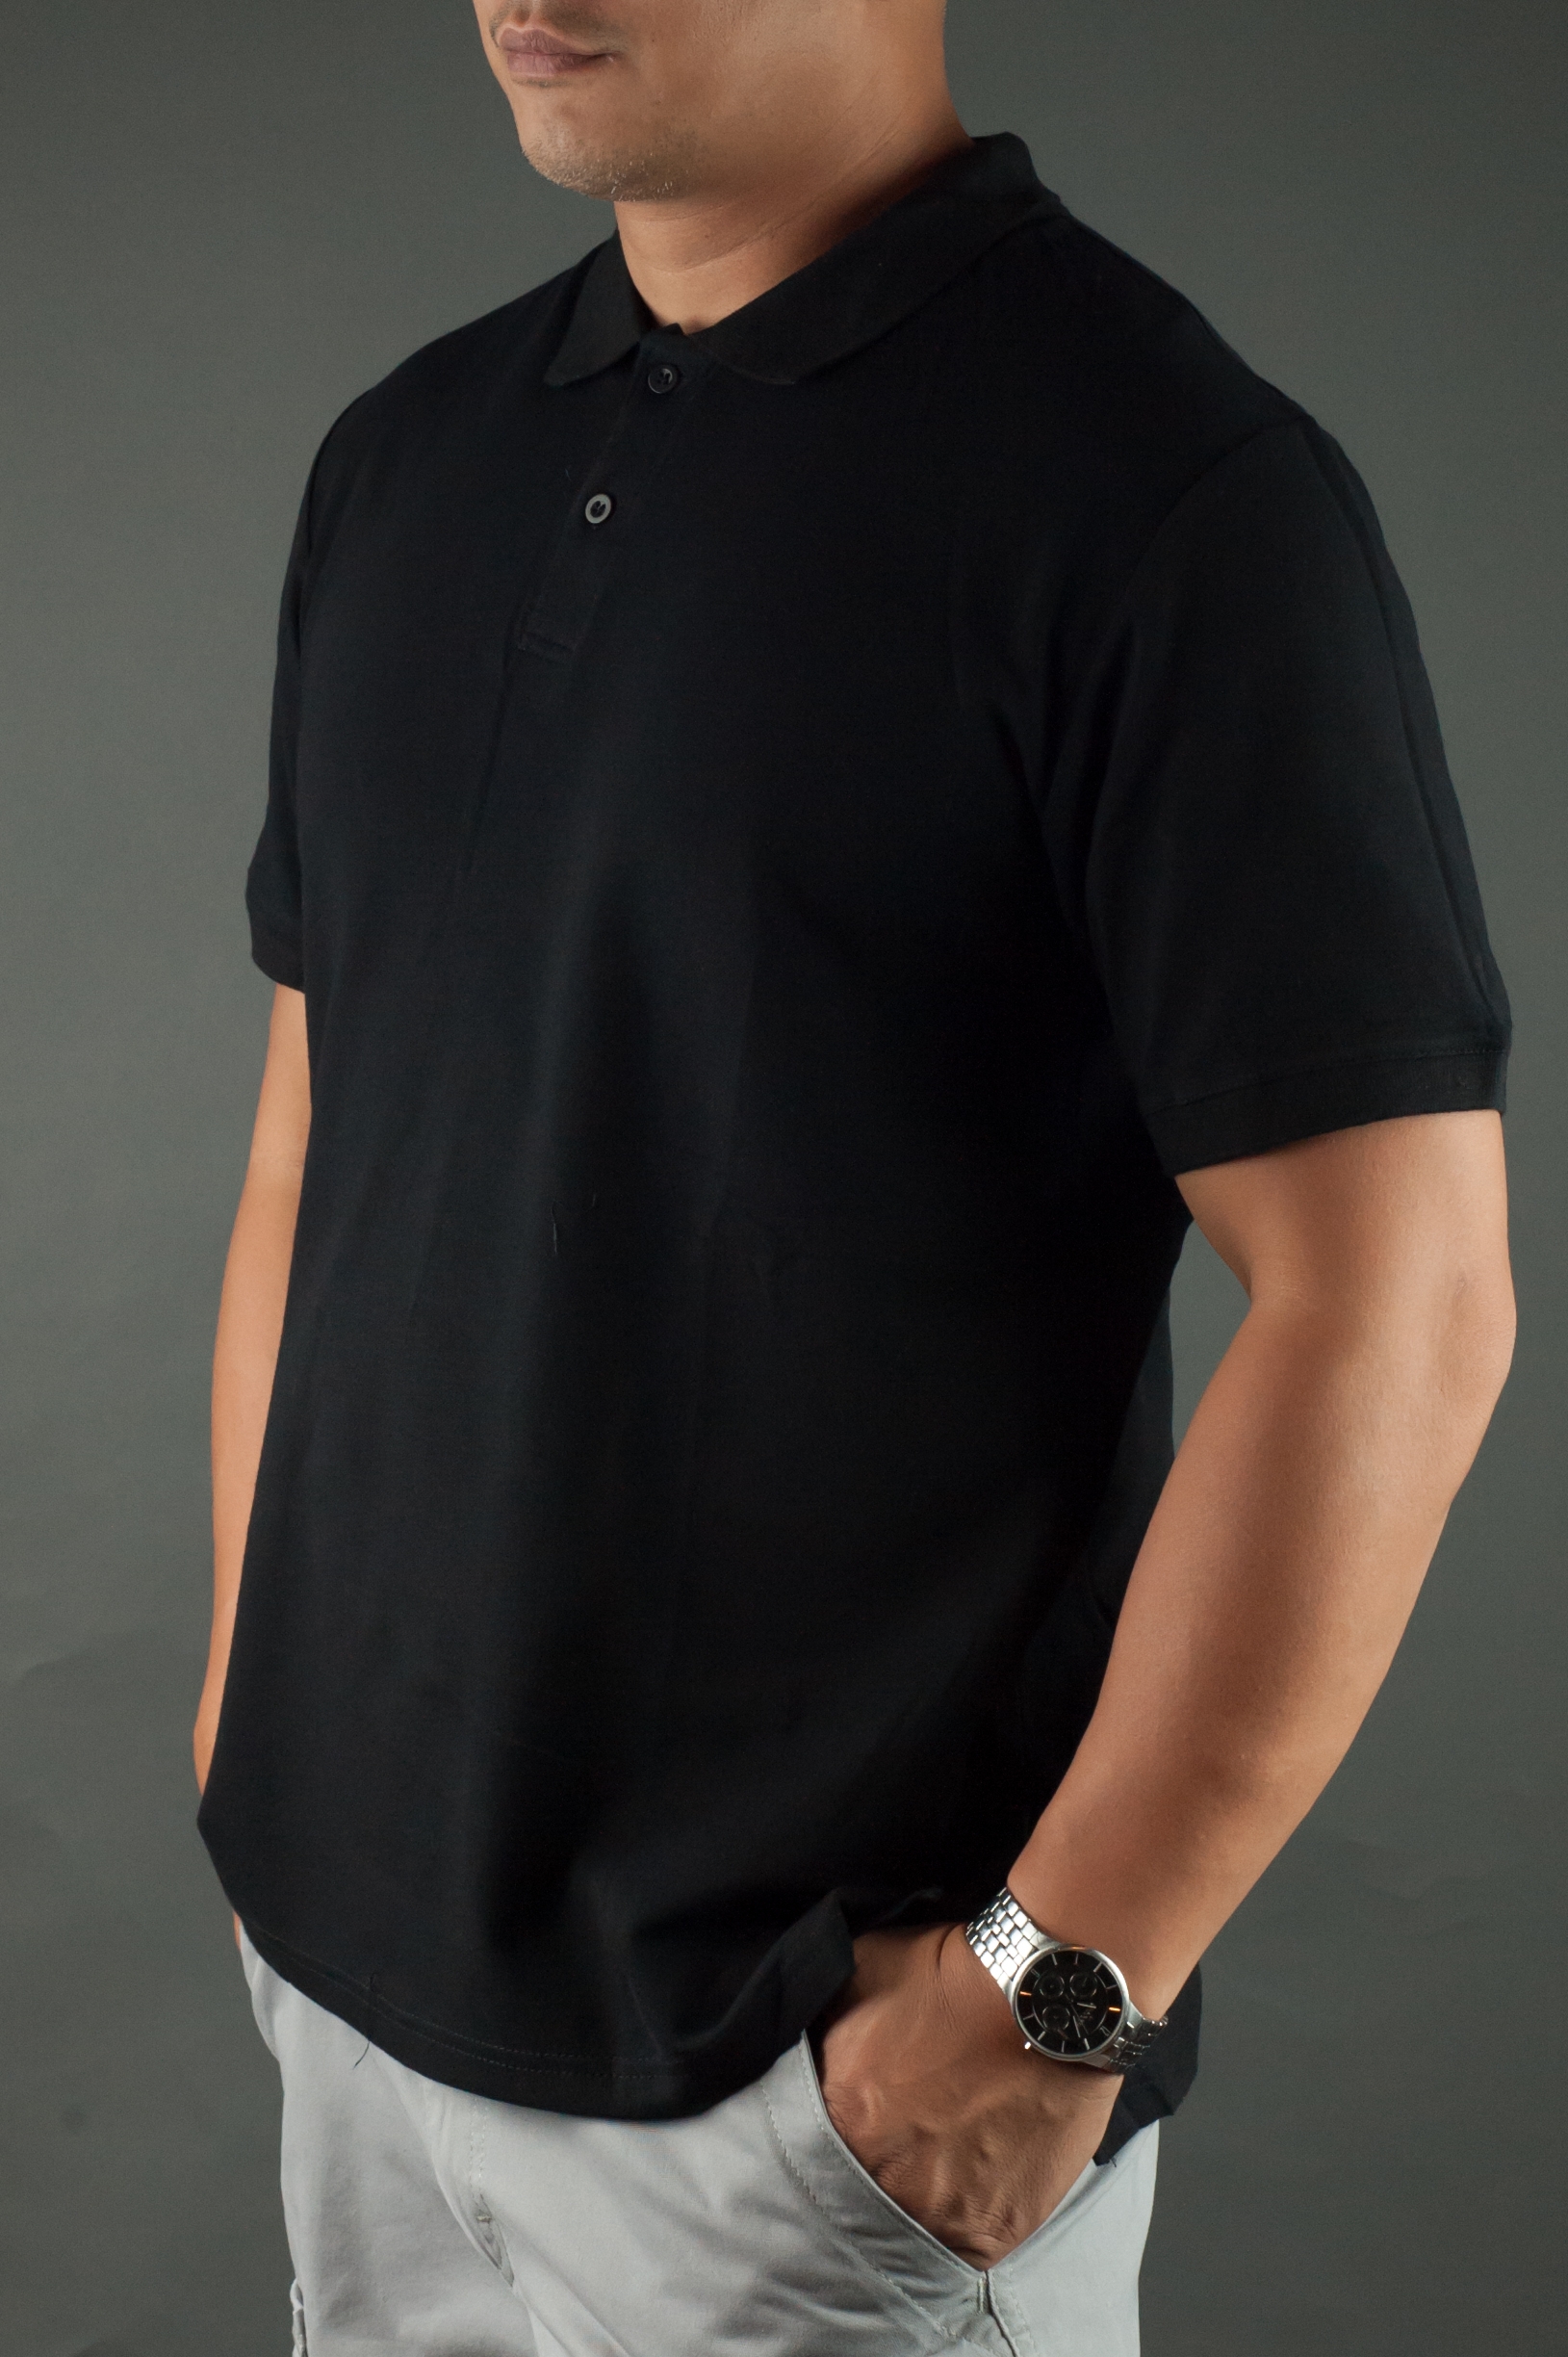 Signature Polo Shirt – Johnny Whales